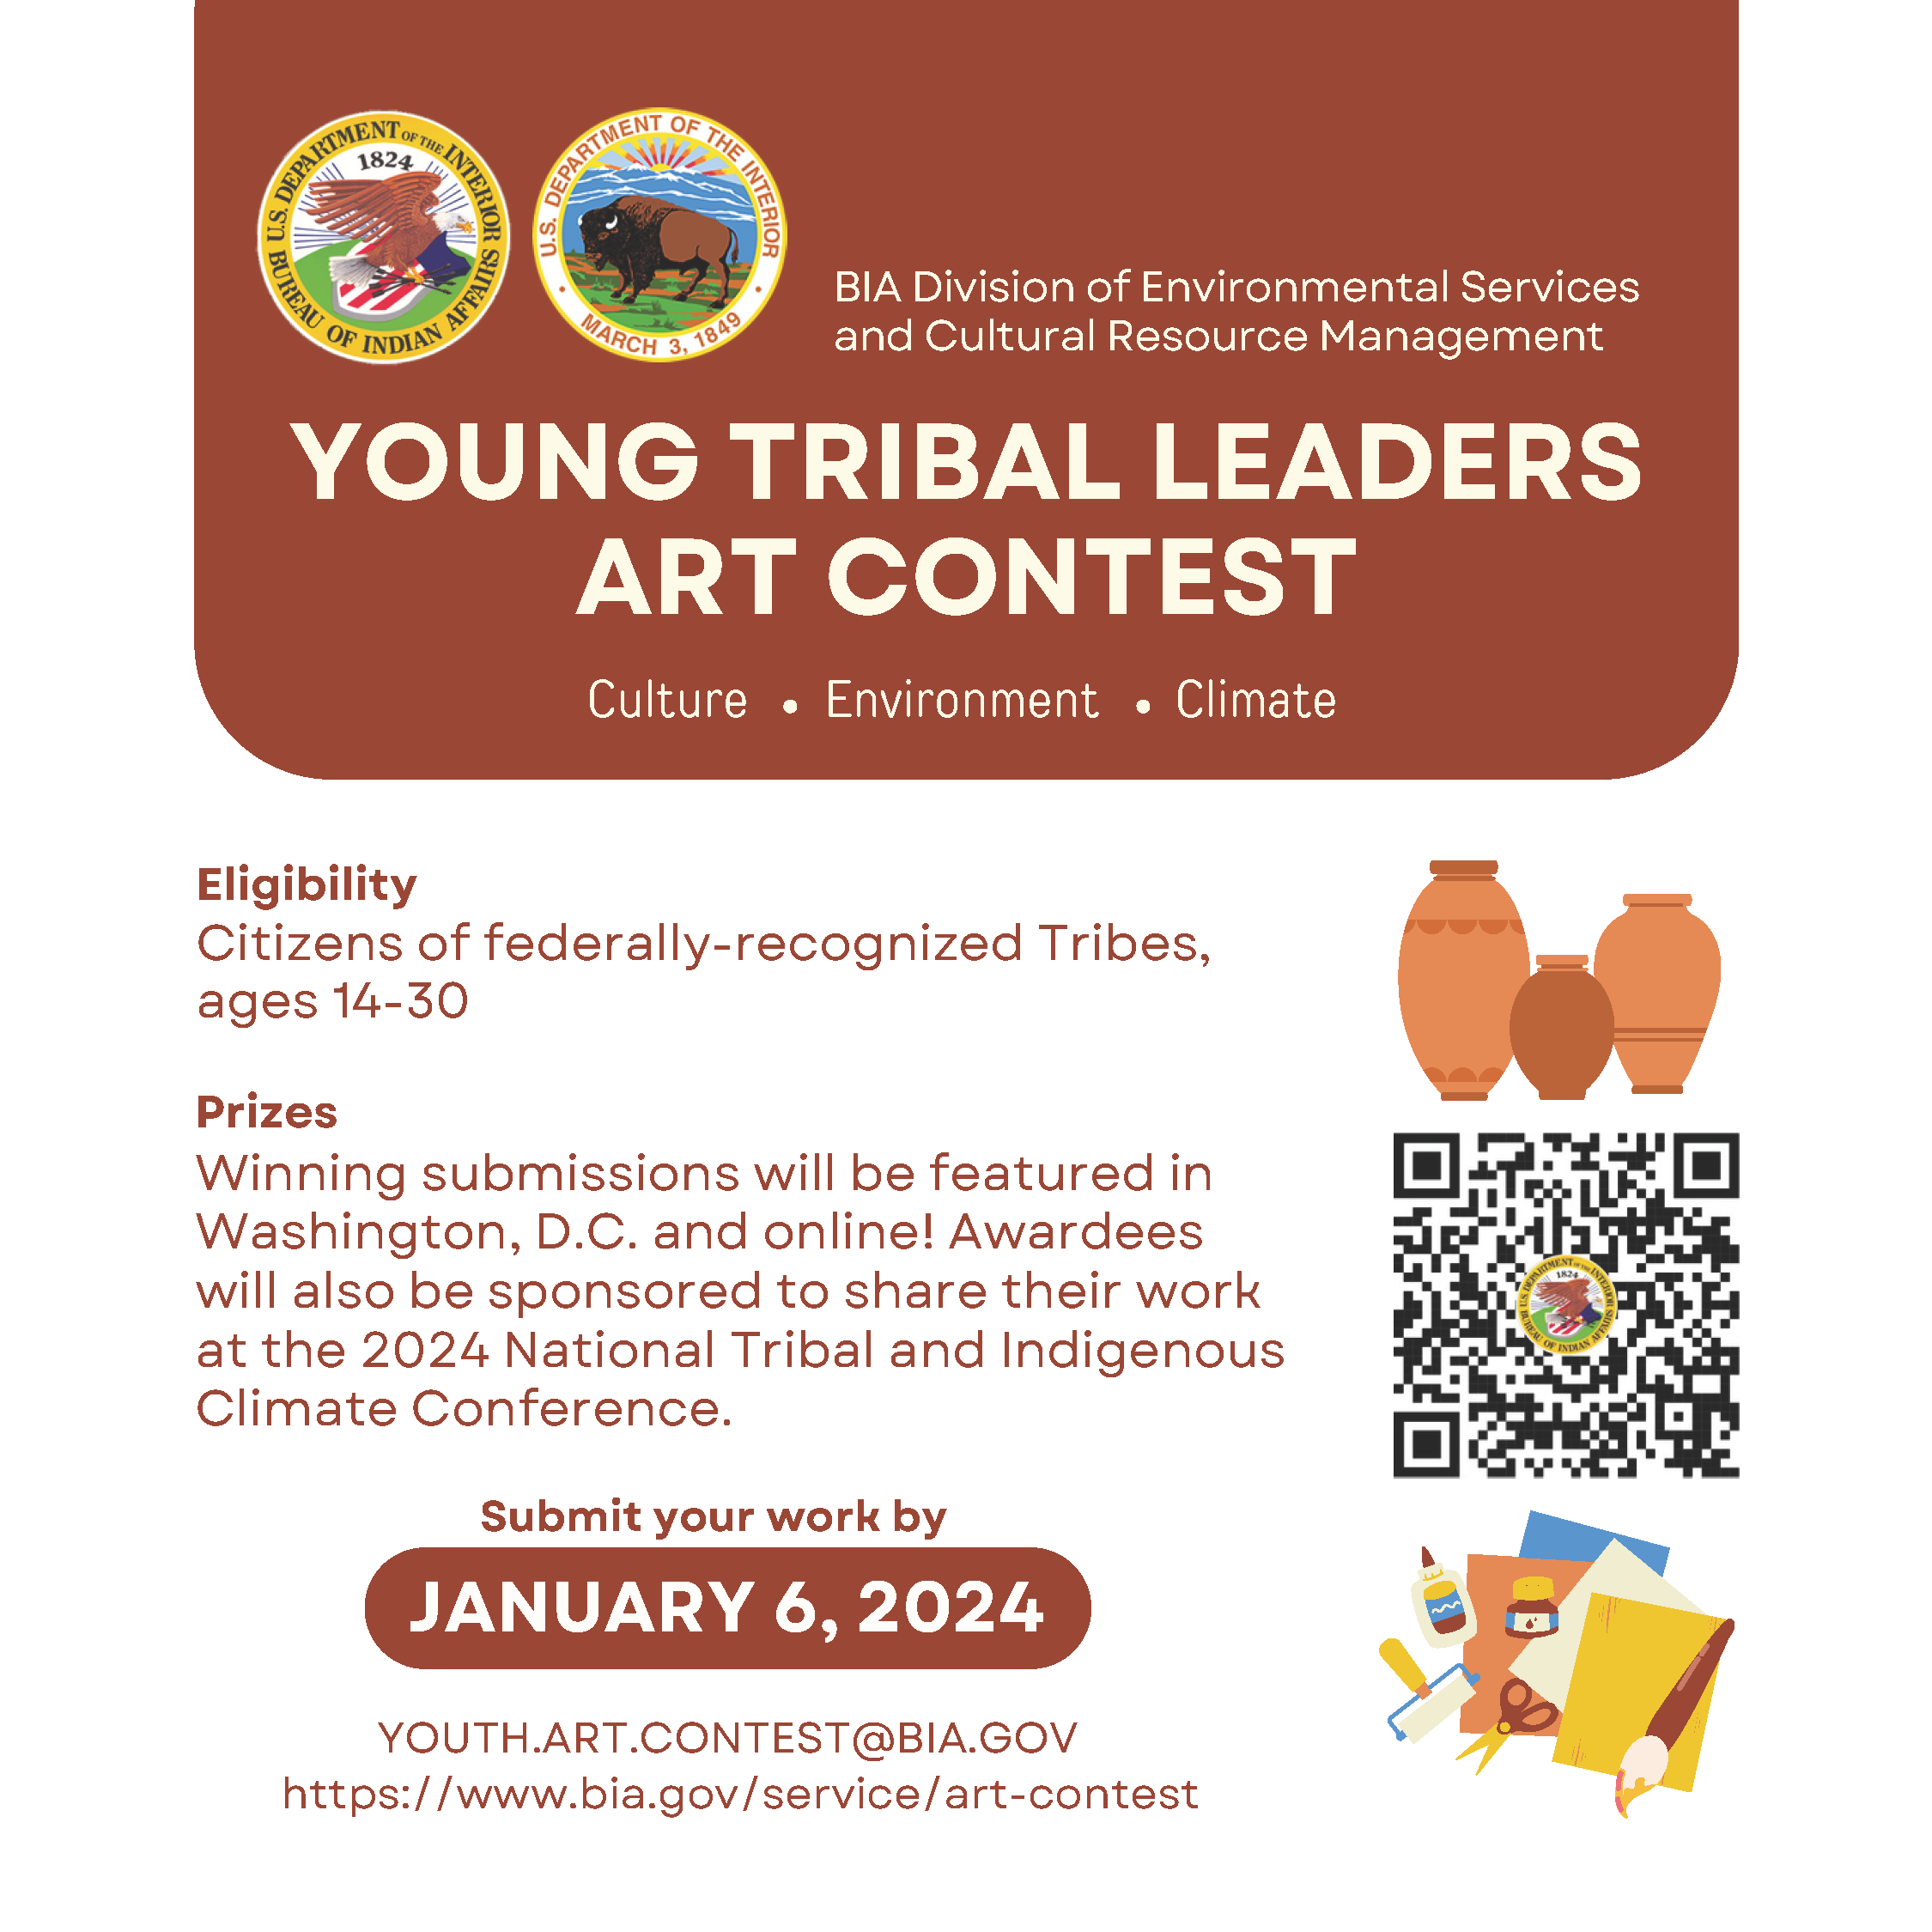 Contest information for the Young Tribal Leaders Art contest, available at bia.gov/service/art-contest